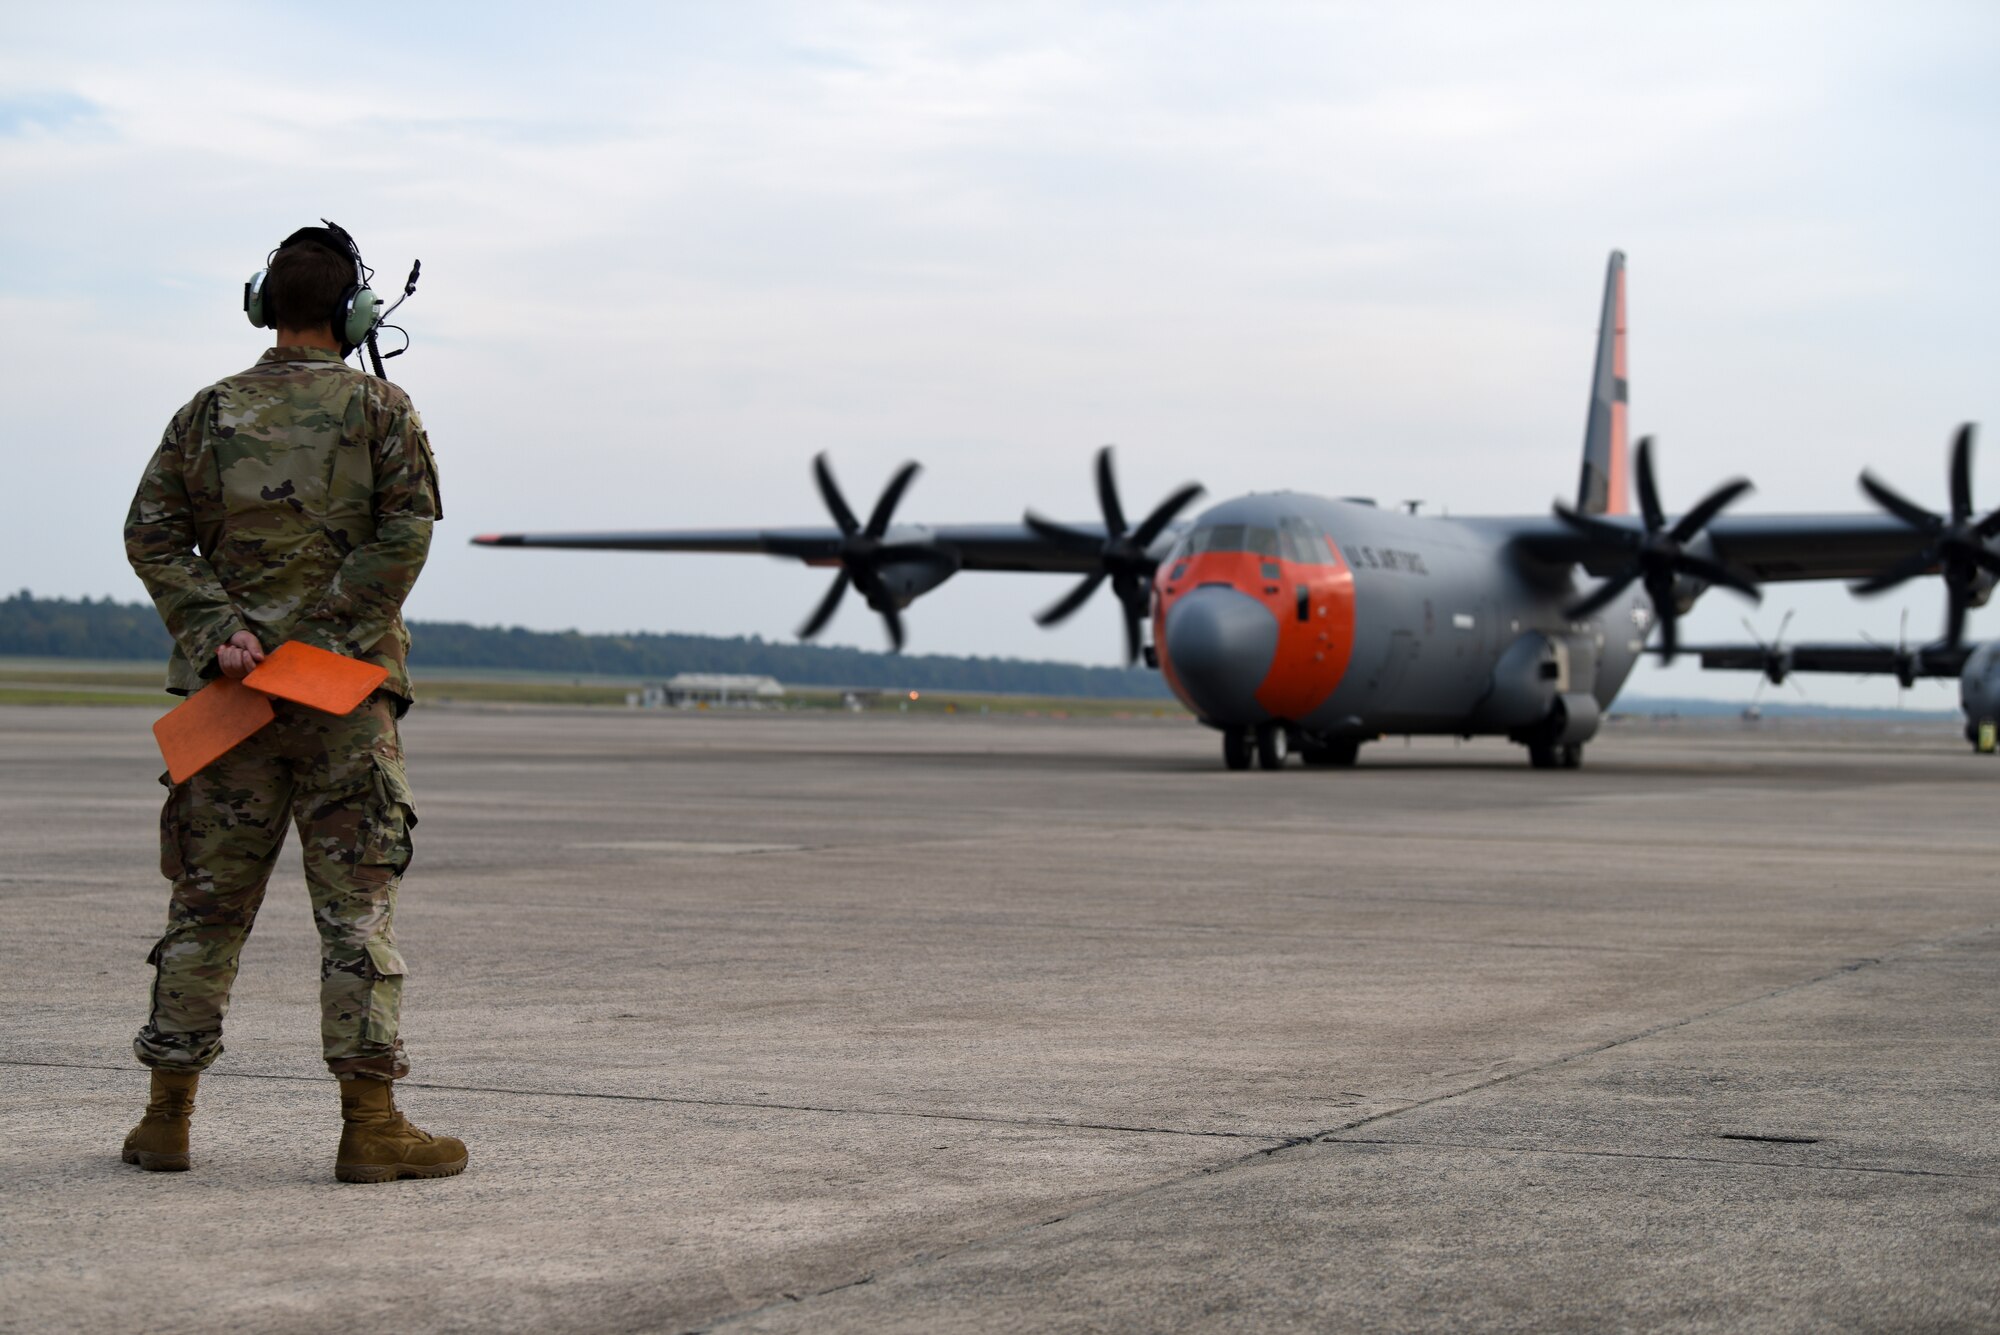 Airman stands with marshaling flags behind back ready to direct plane